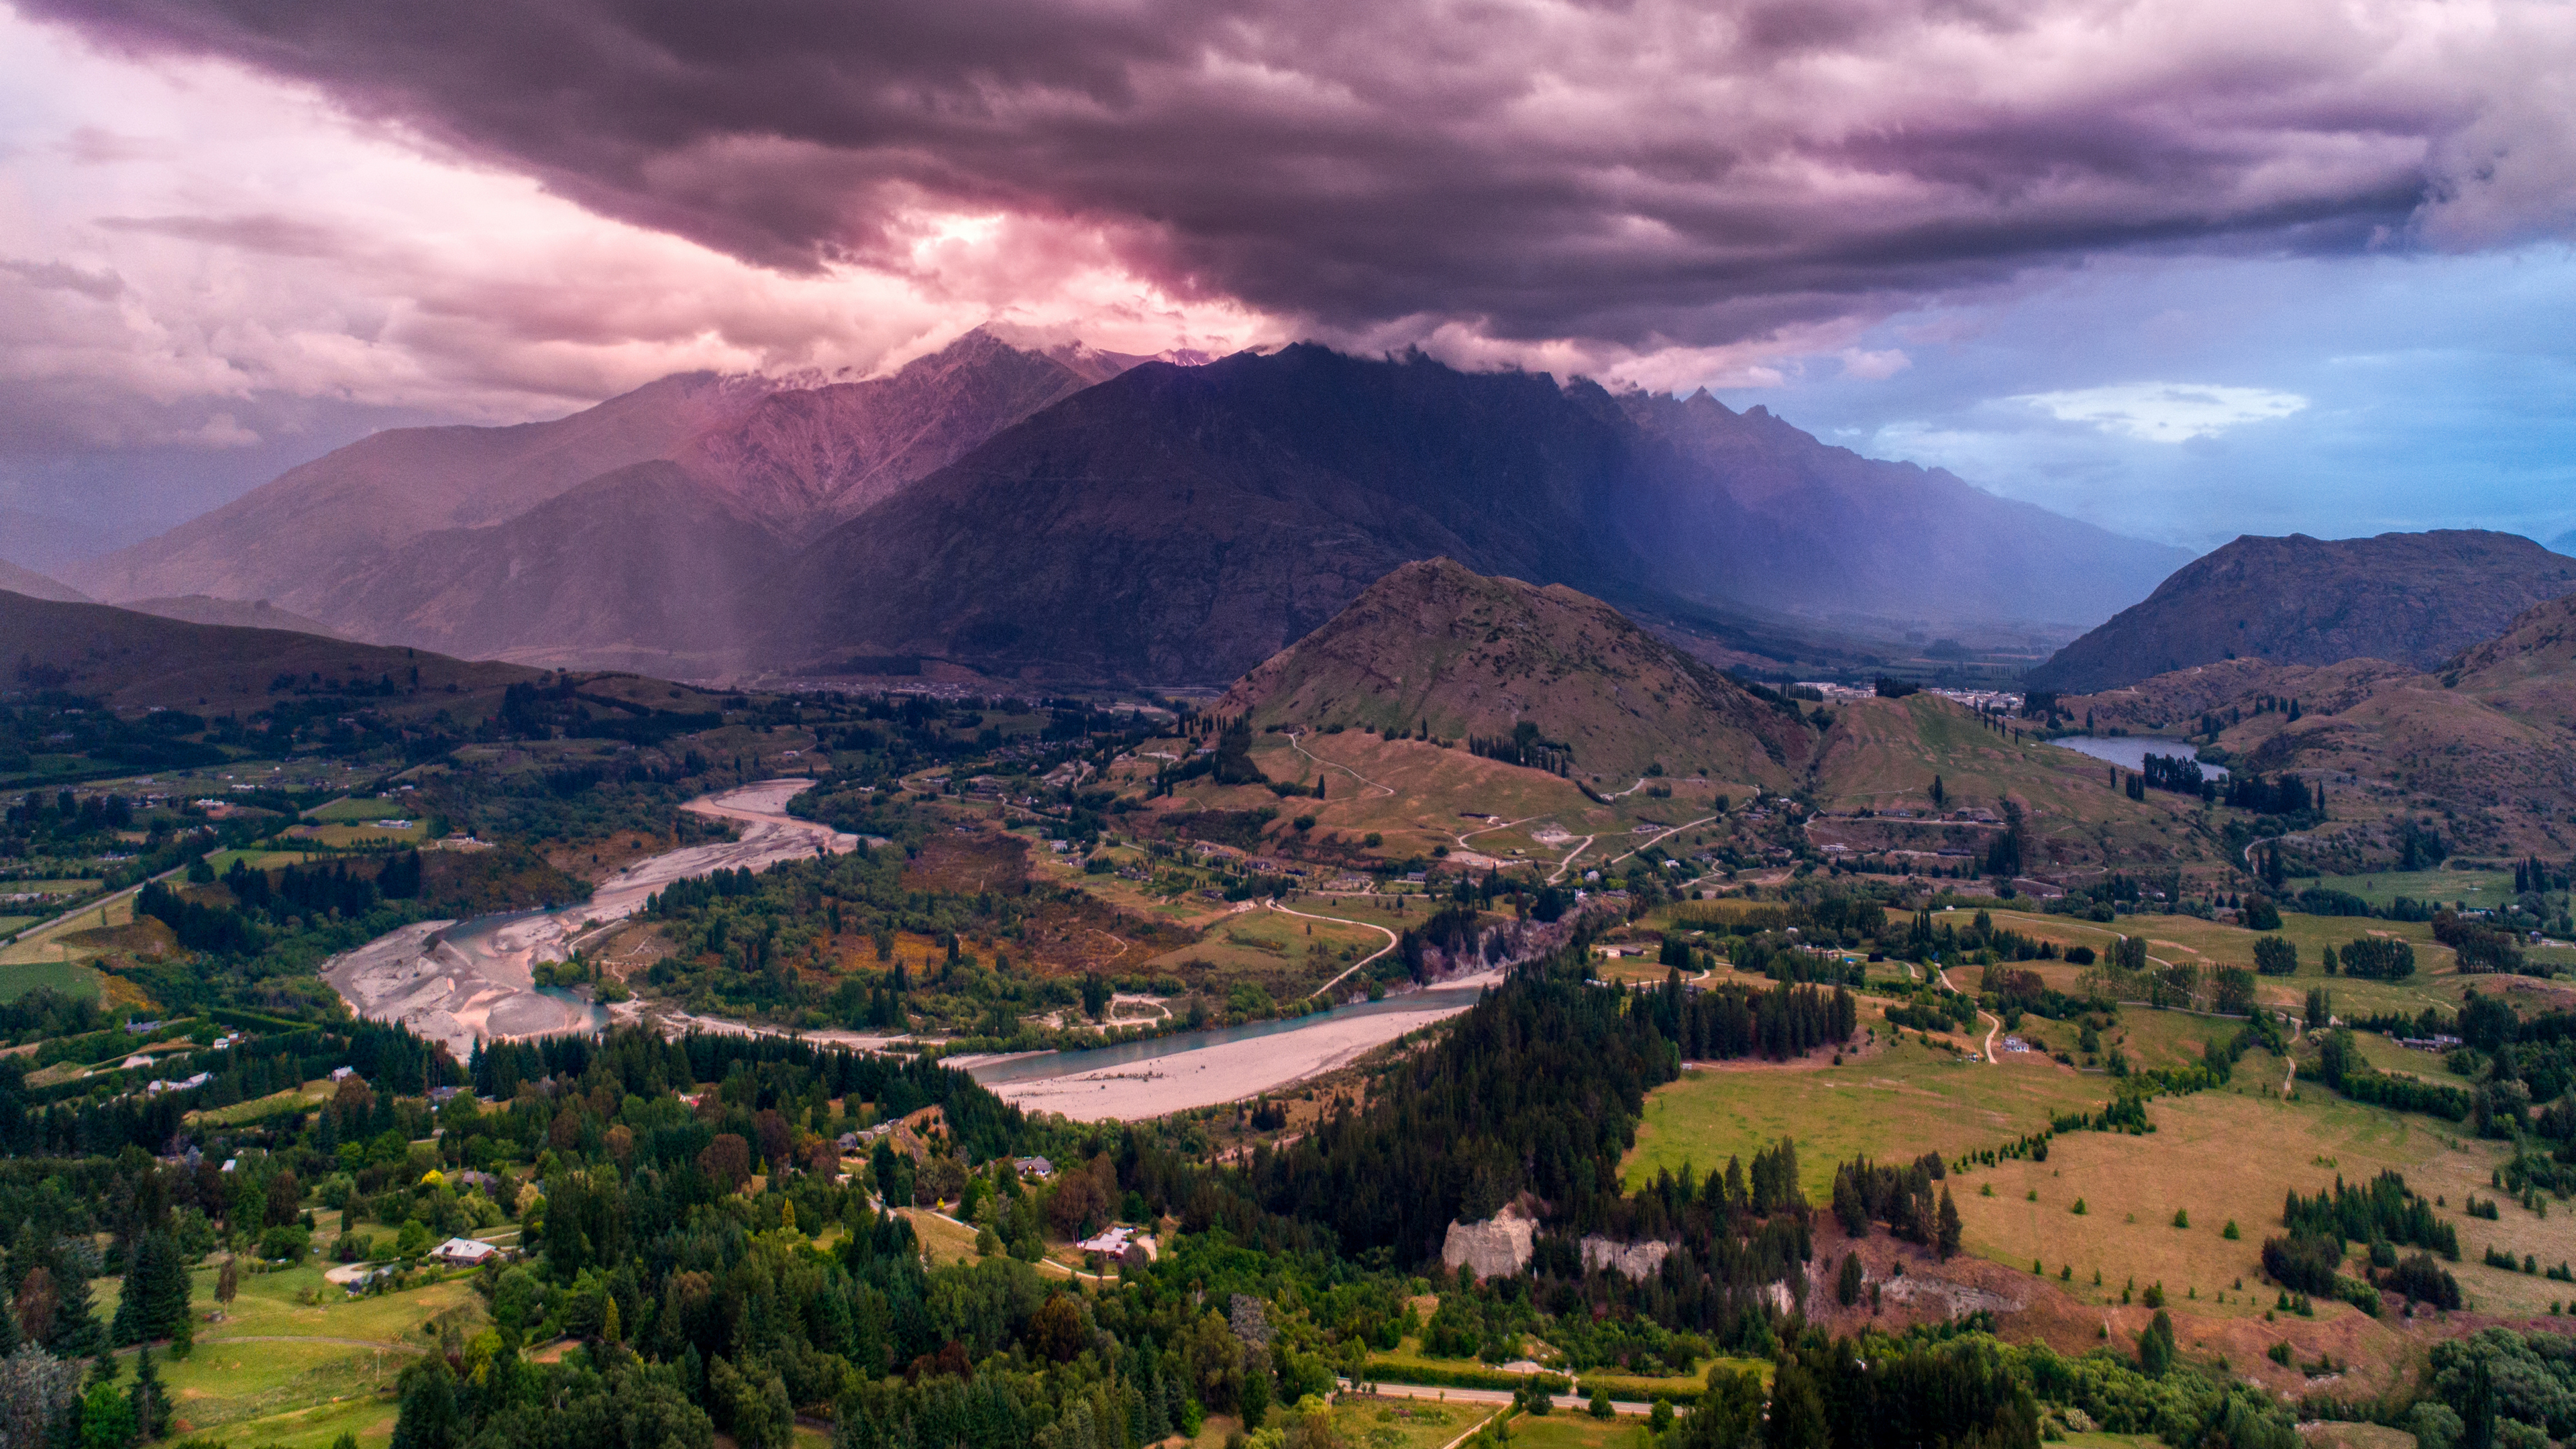 General 3840x2160 landscape 4K New Zealand nature mountains clouds trees sky